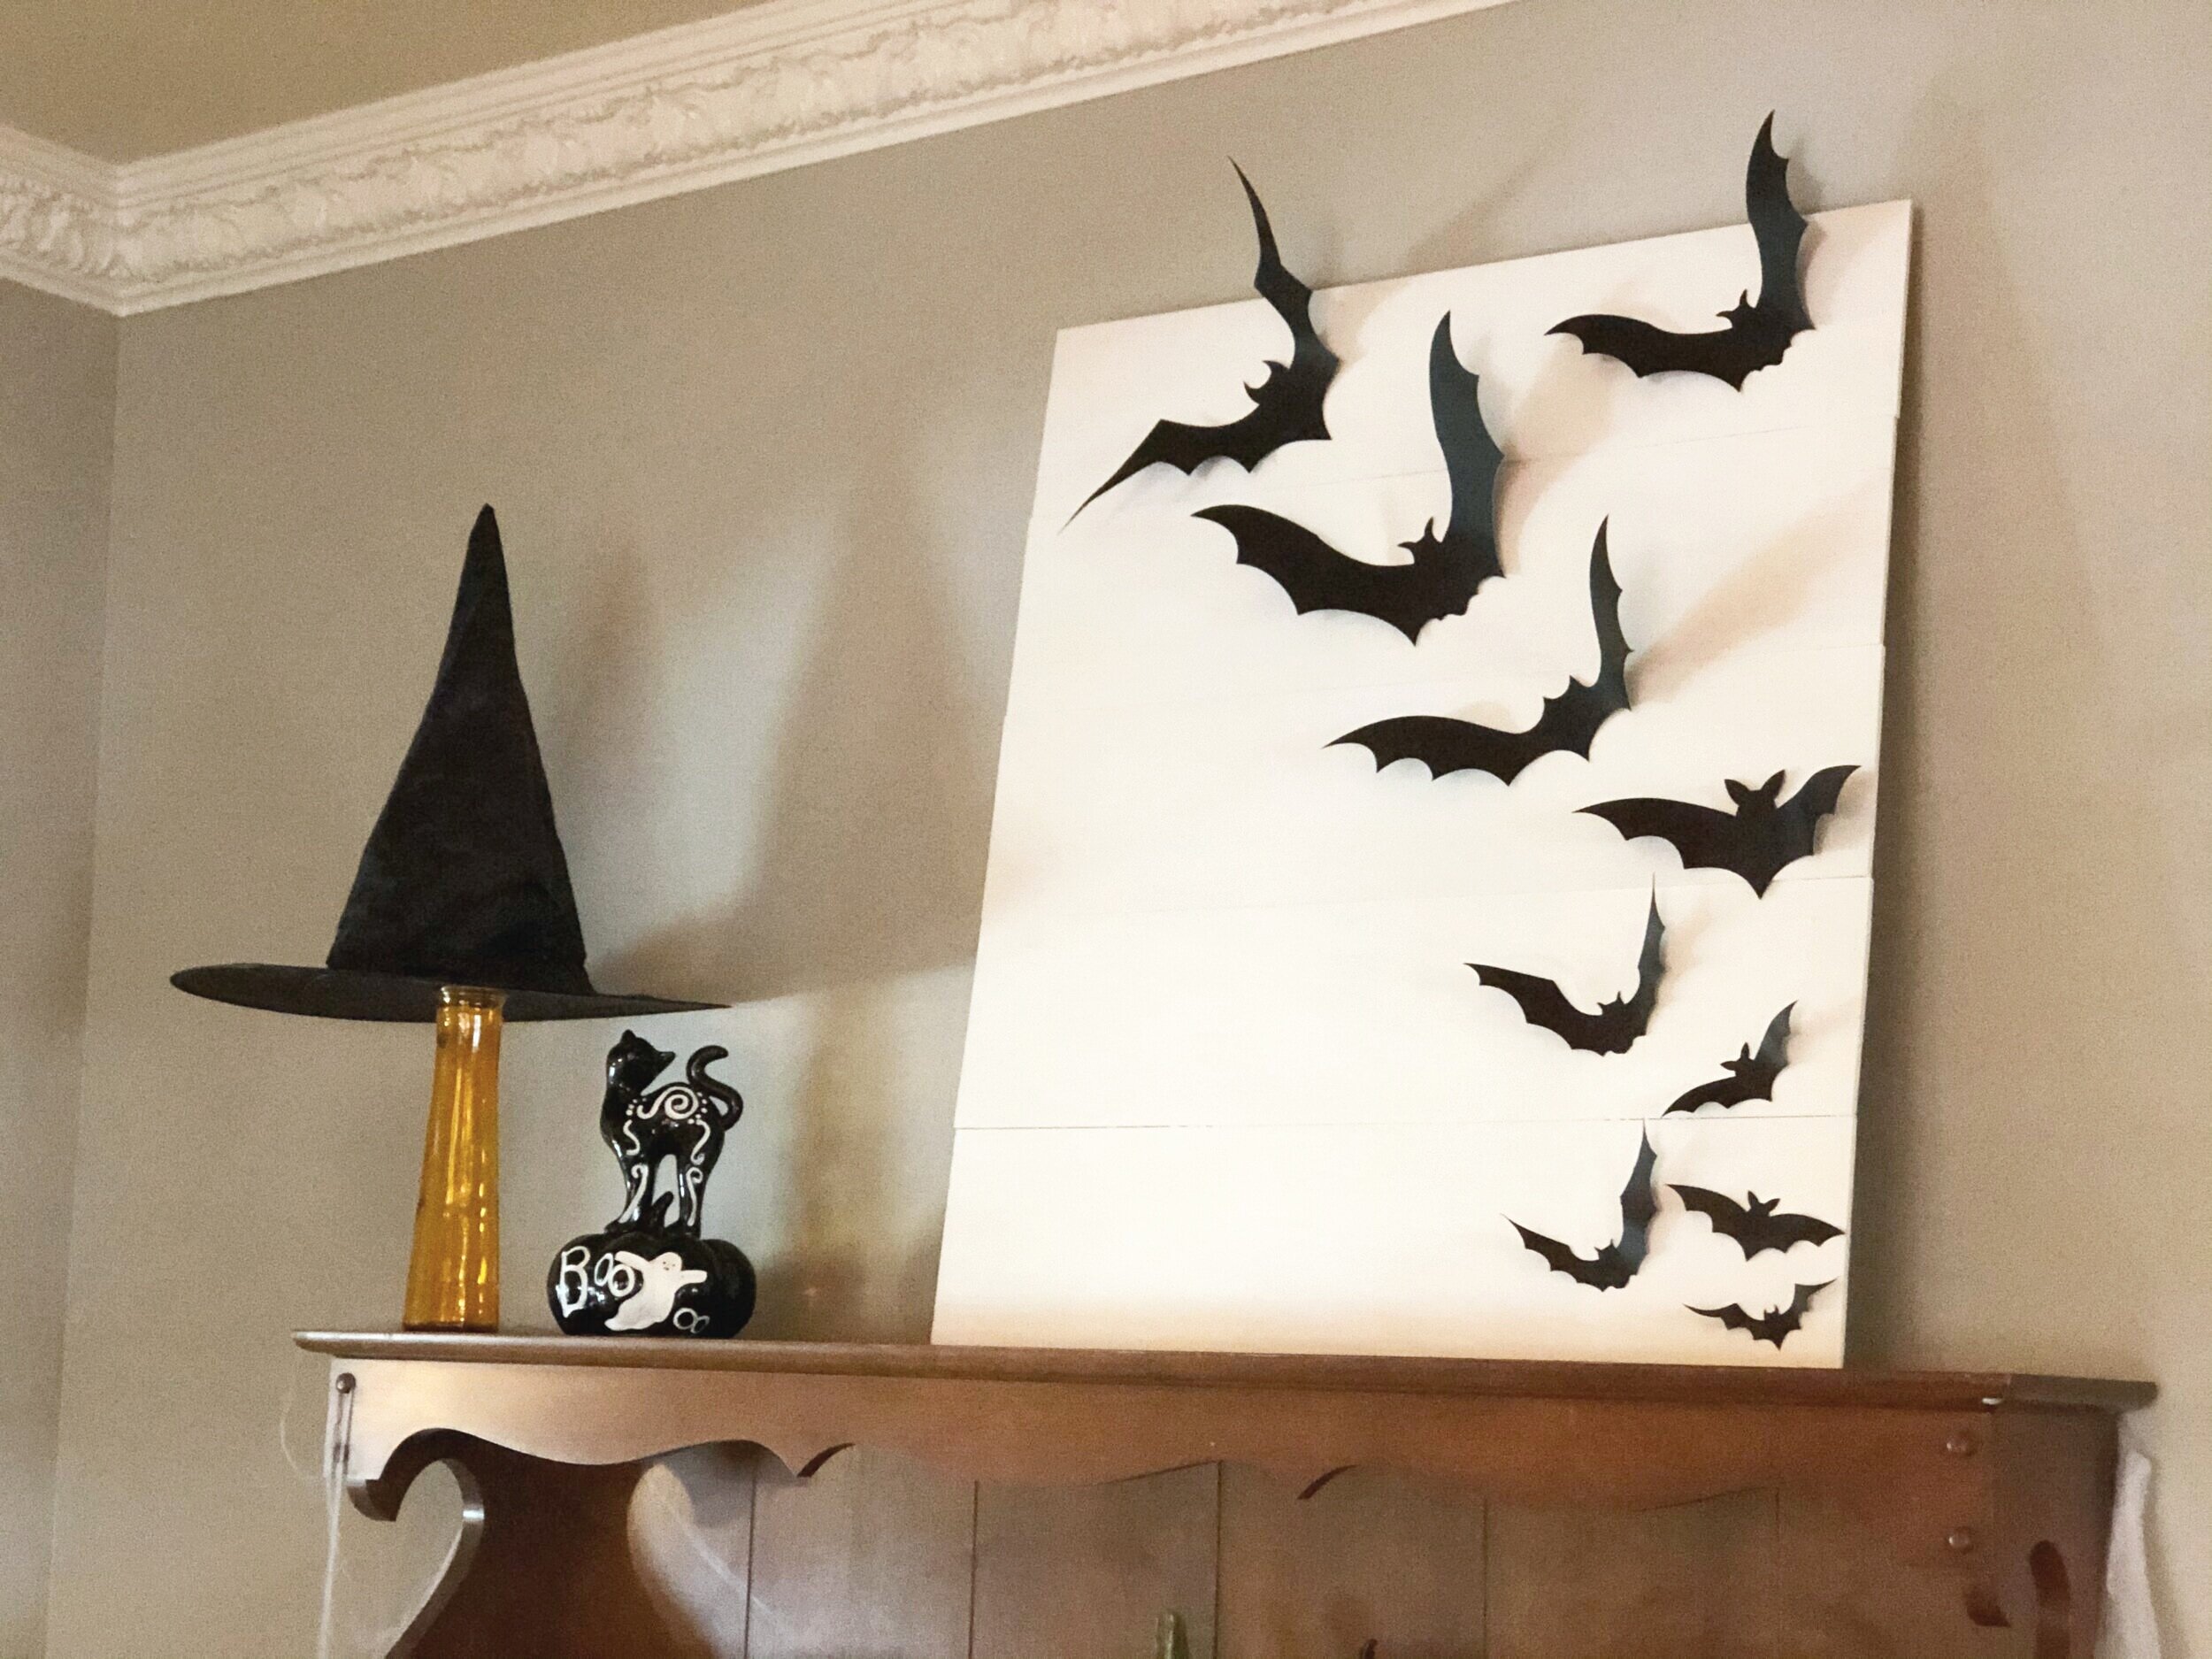 How to make an easy and cute Halloween decoration using a Dollar Tree vase and a witch hat. DIY Halloween decor using your Cricut cutting machine. Make your own adorable witch hat Halloween decoration.